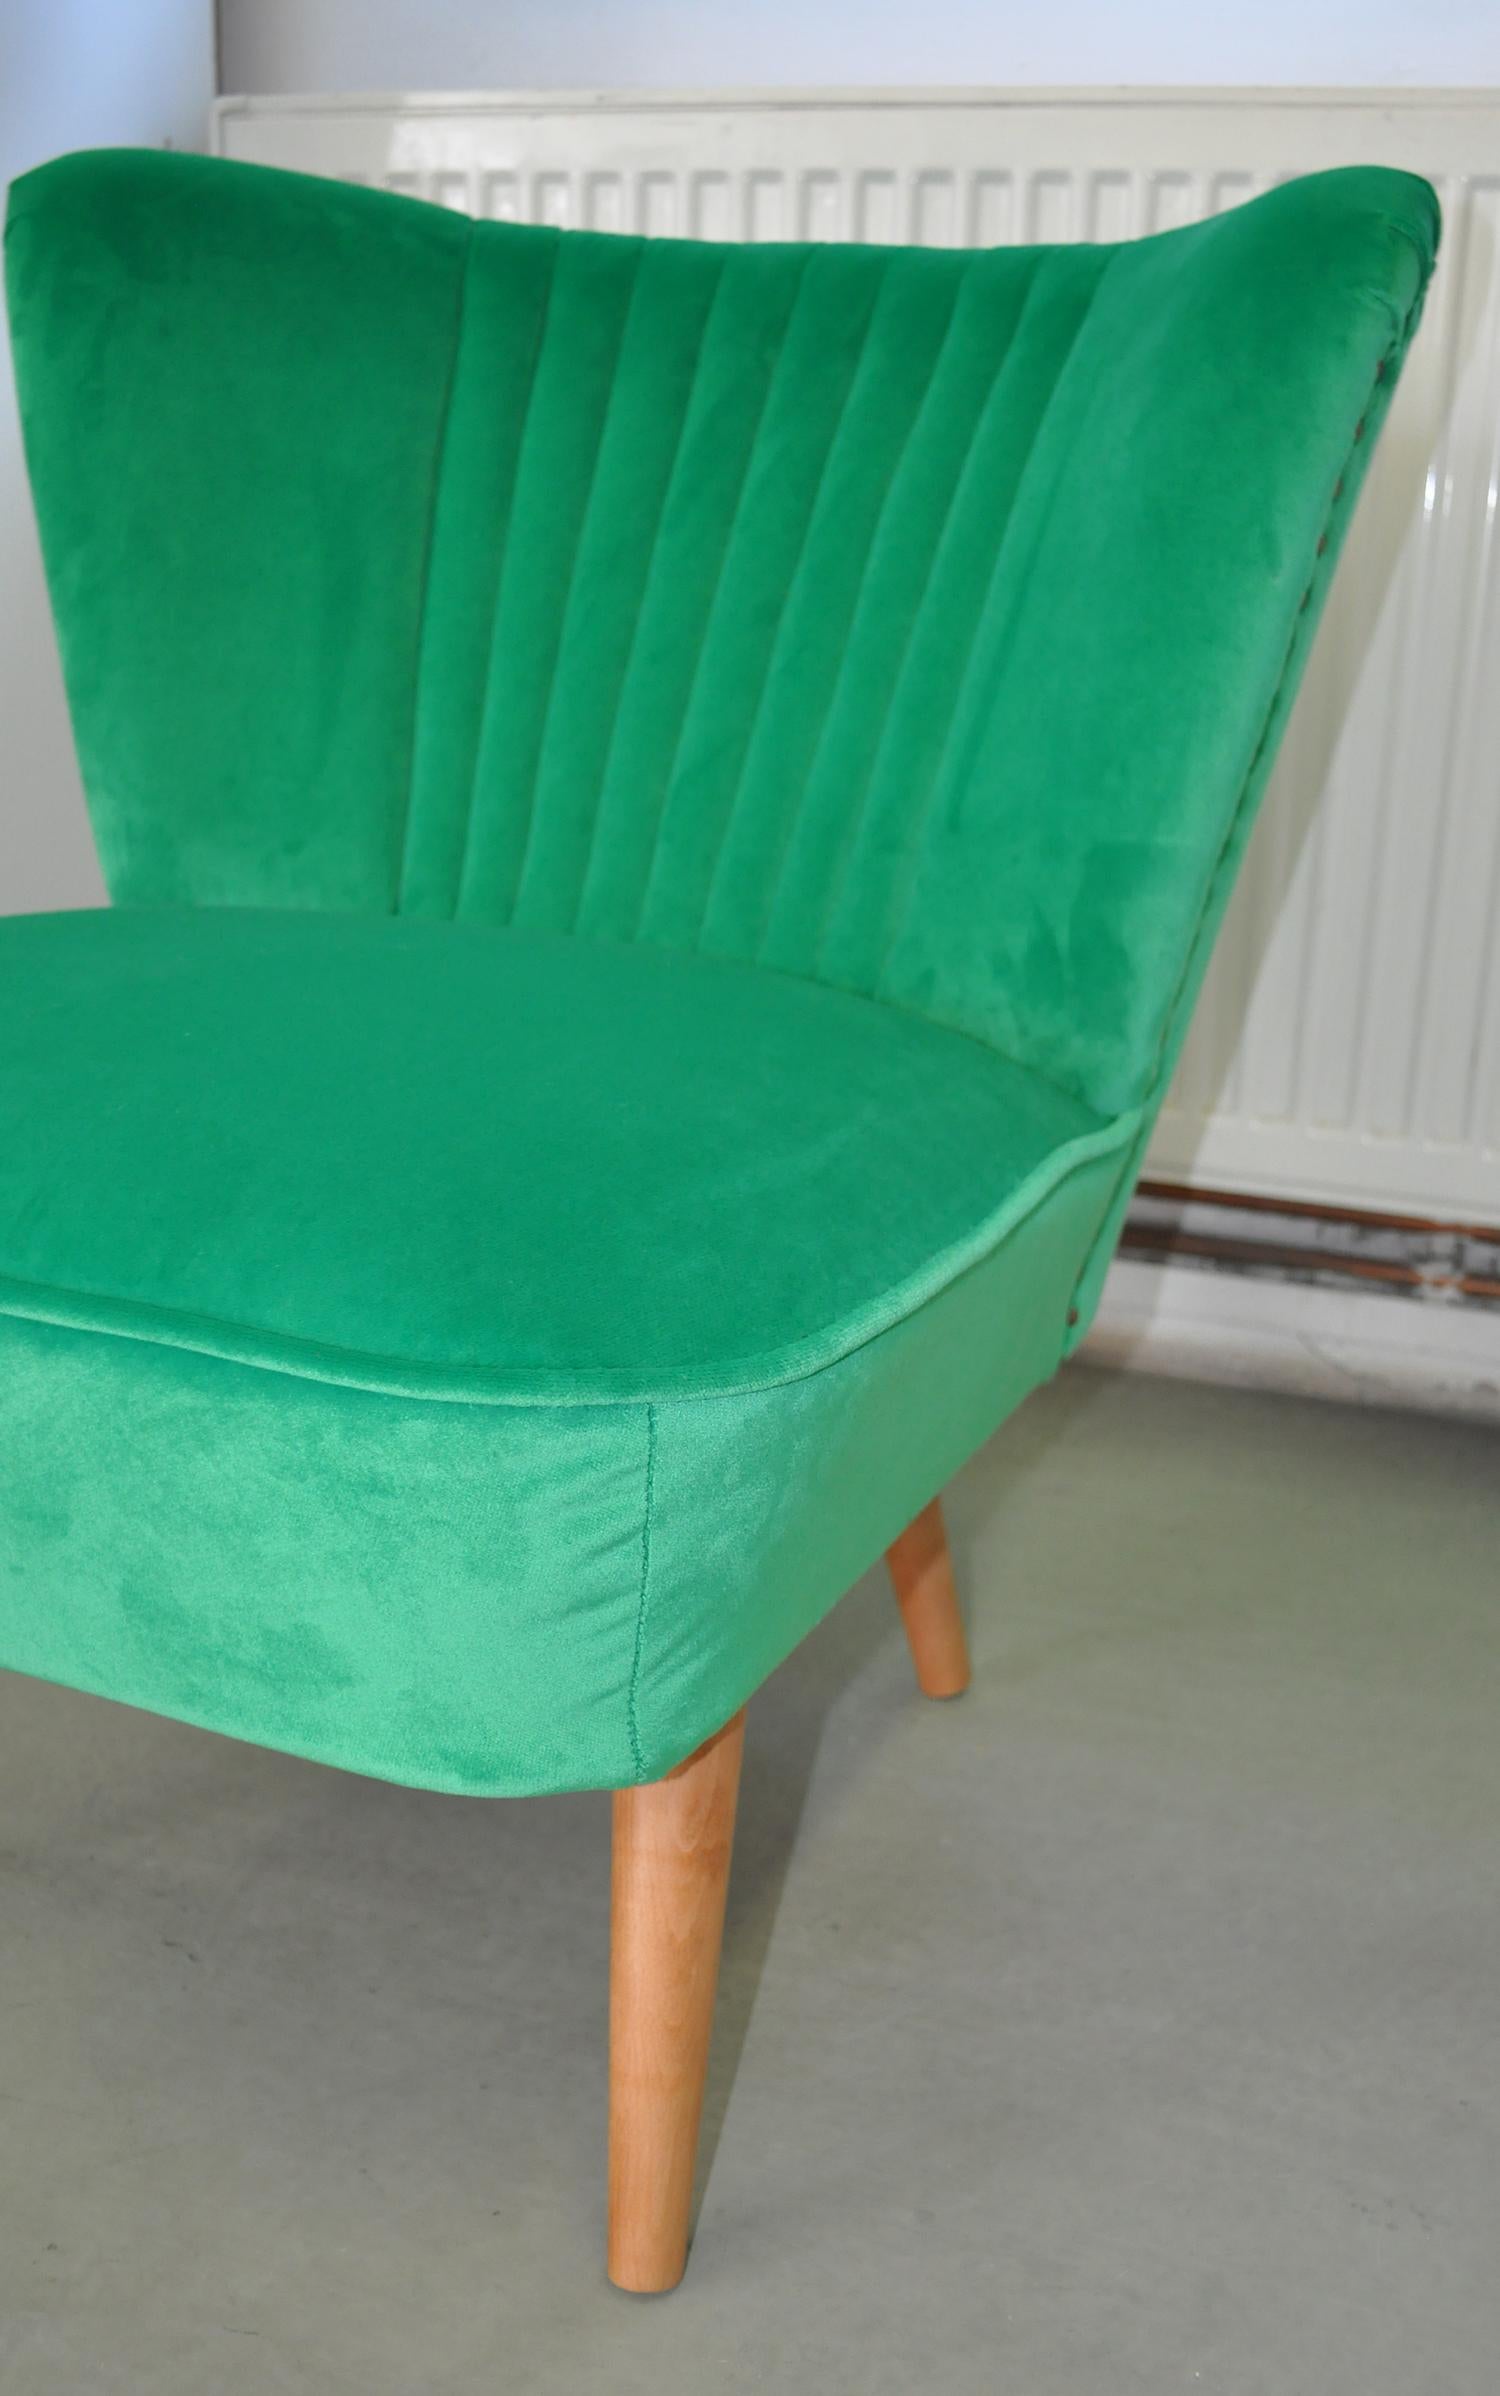 Cocktail Chair with a Green Fabric (Buchenholz) im Angebot